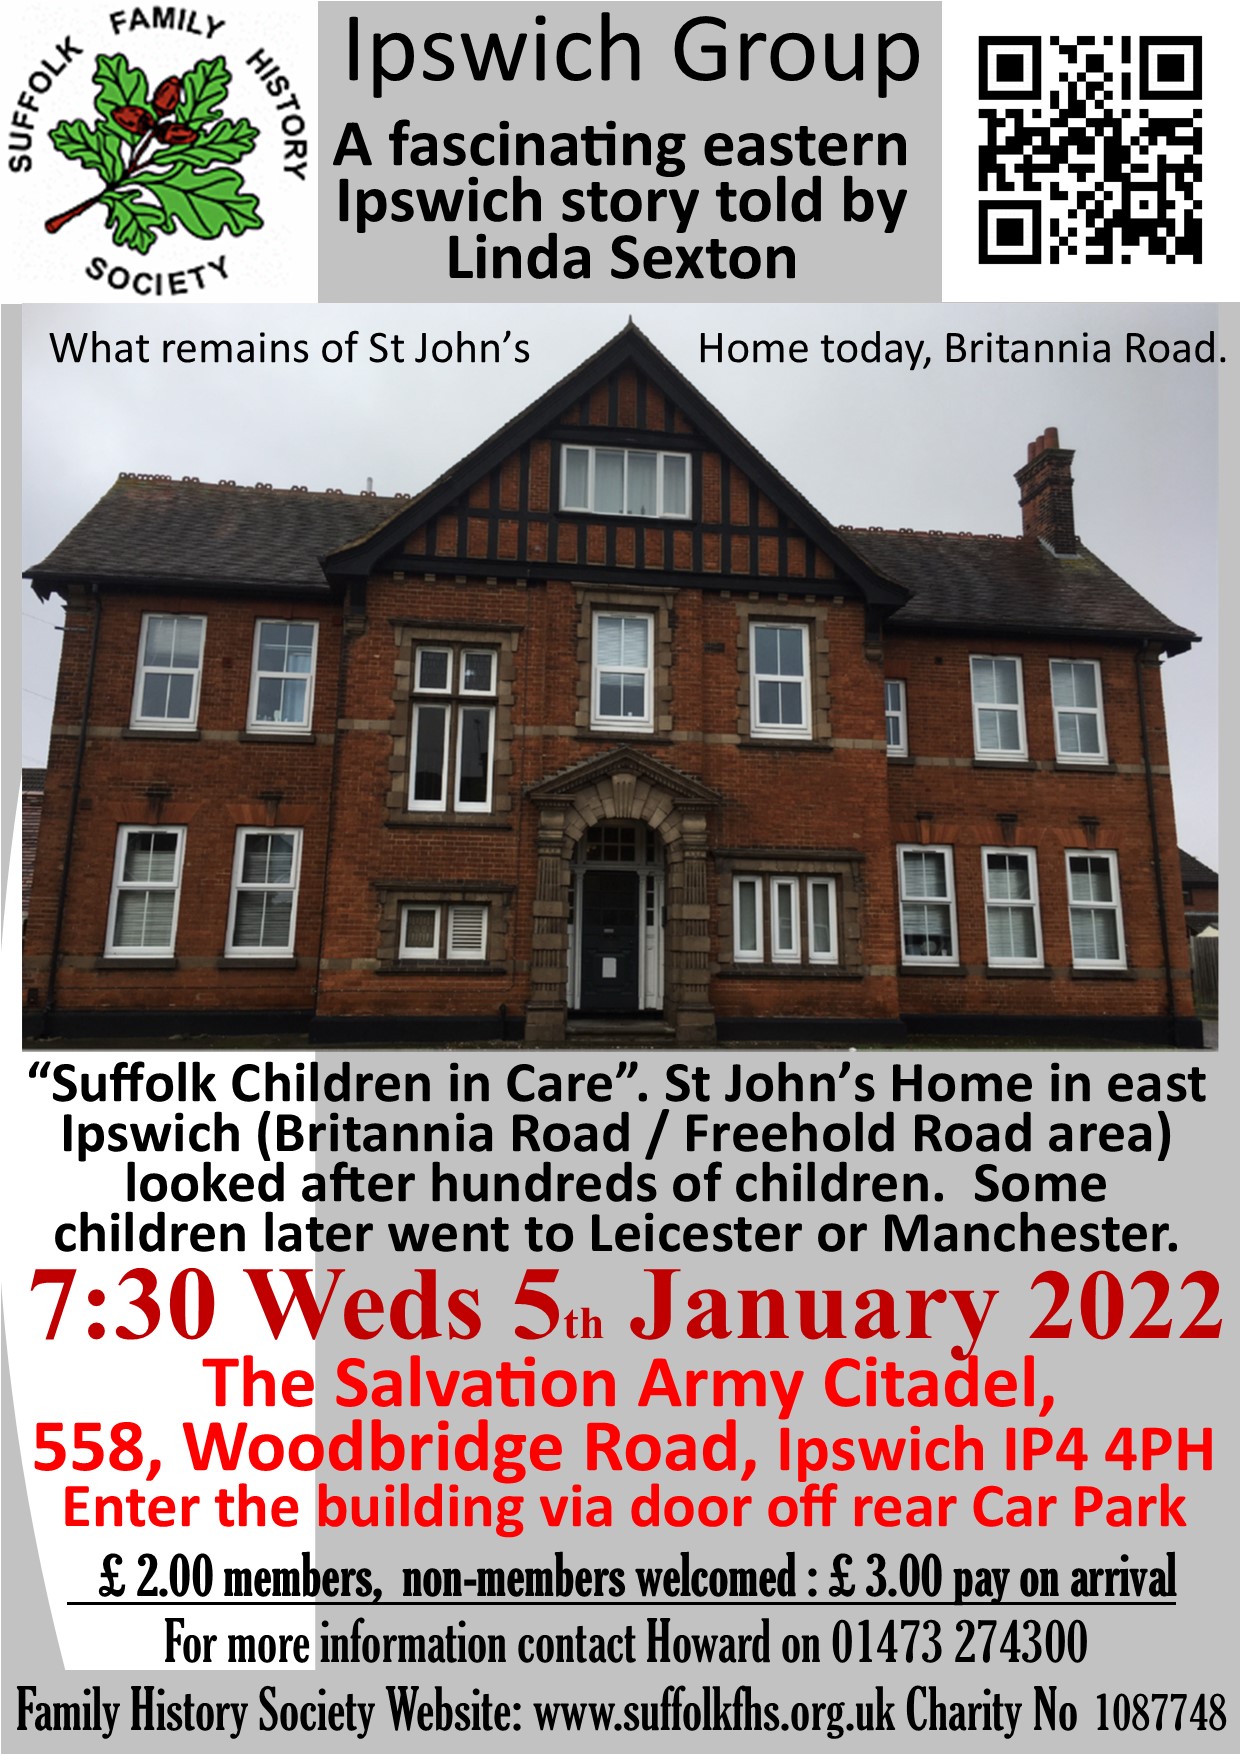 Ipswich Group, Suffolk Family History Society, "Suffolk Children in Care" St Johns Home East Ipswich. | Flyer Magazines